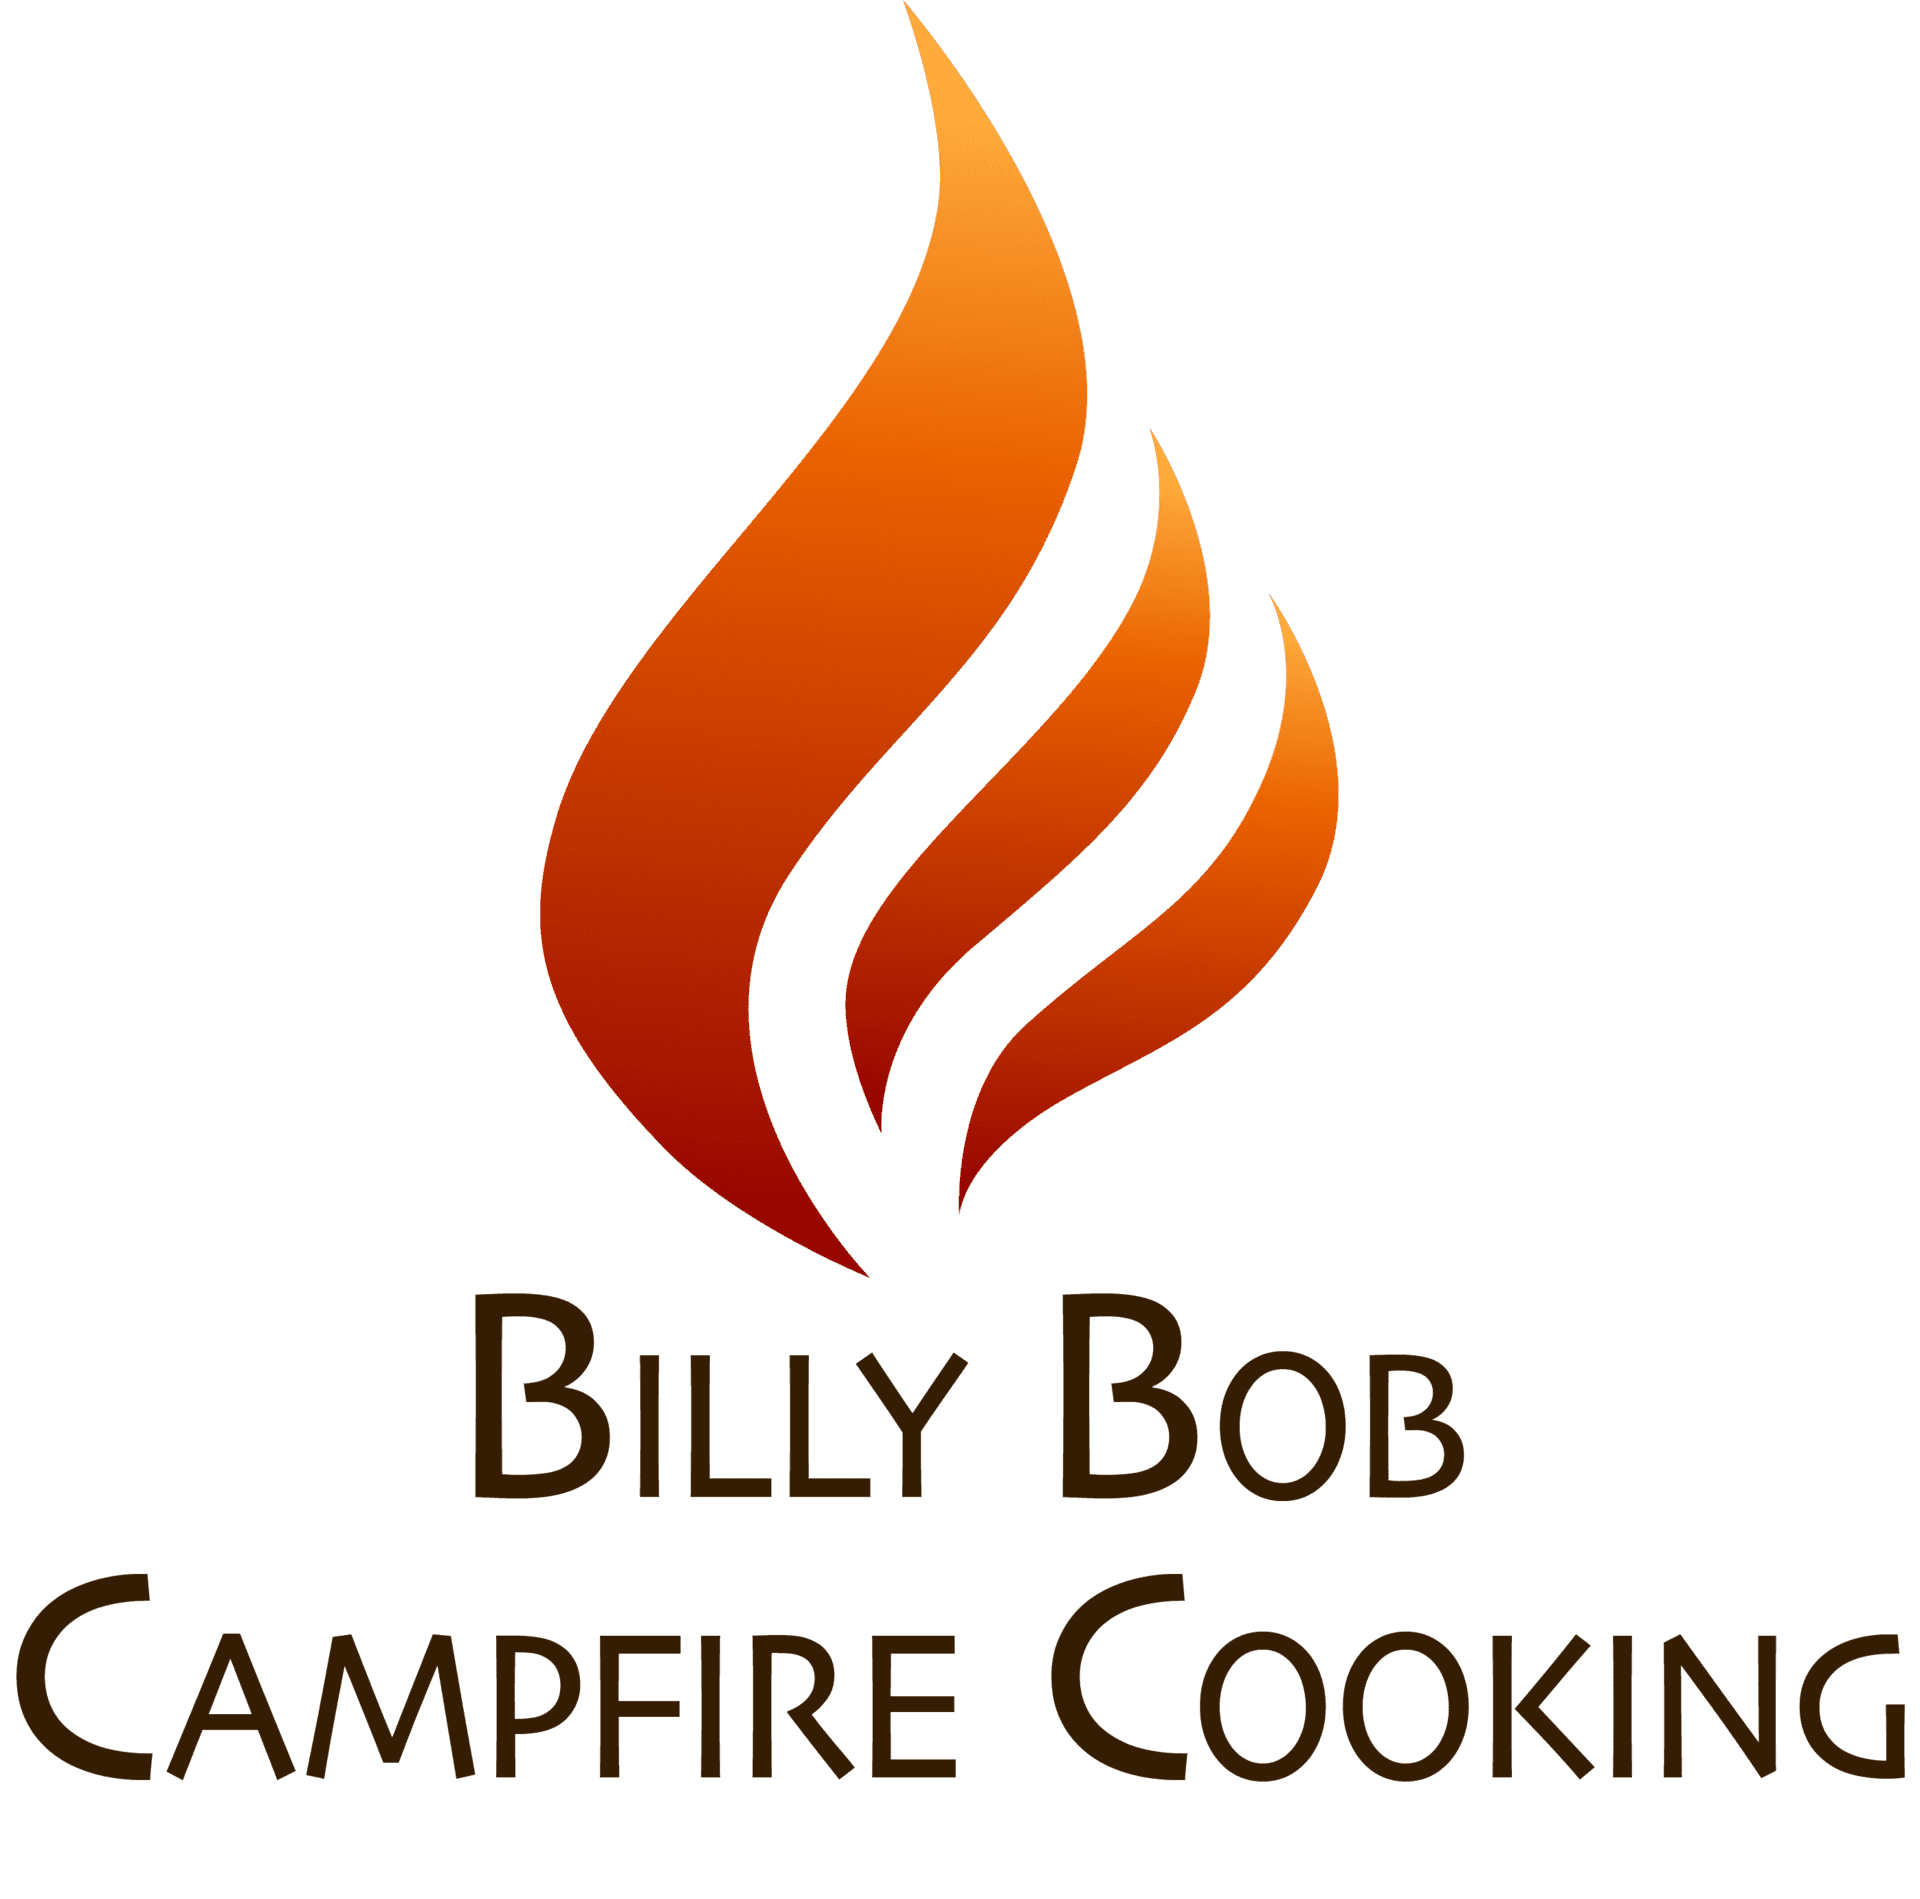 Cooking.com Logo - Billy Bob Campfire Cooking Grill Sets